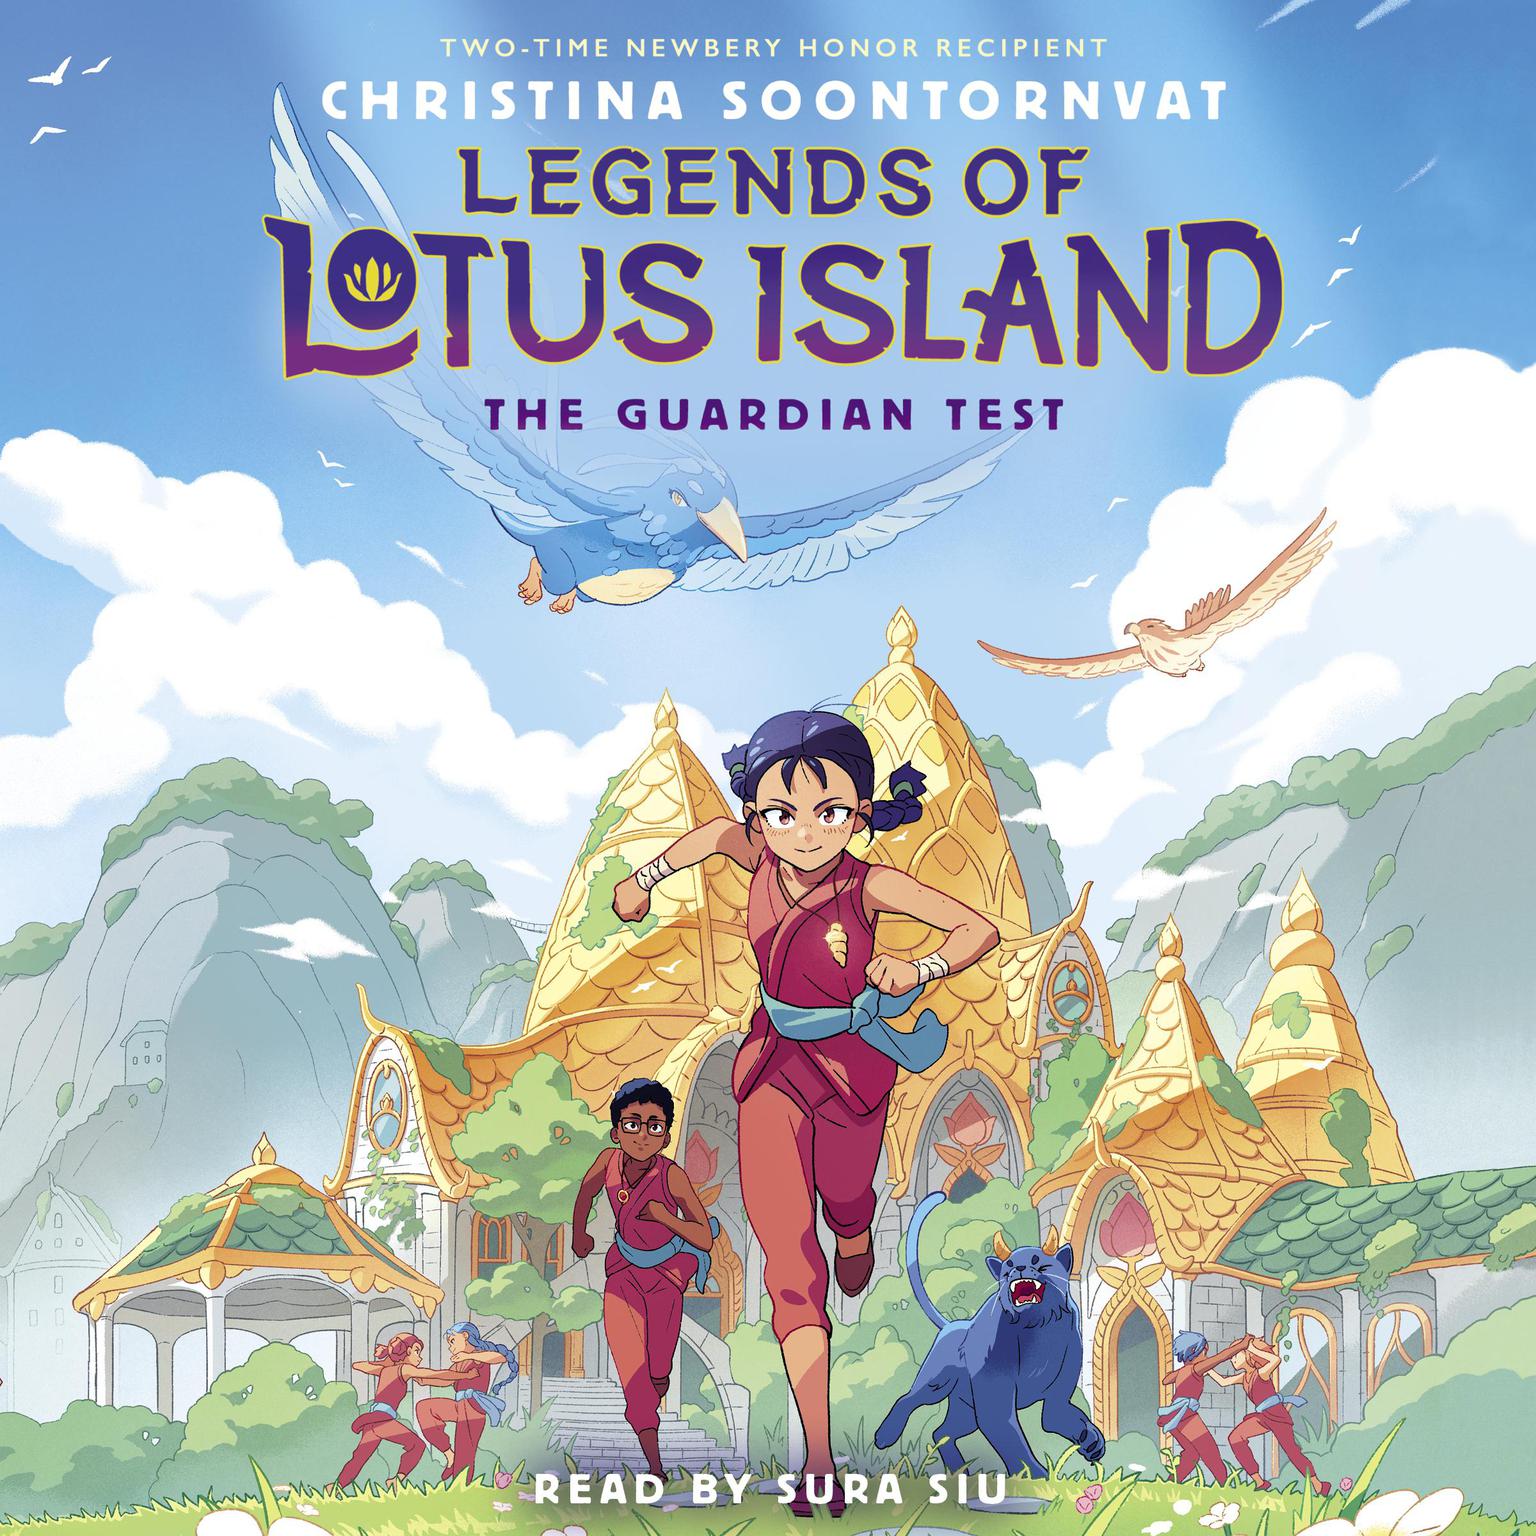 The Guardian Test (Legends of Lotus Island #1) Audiobook, by Christina Soontornvat